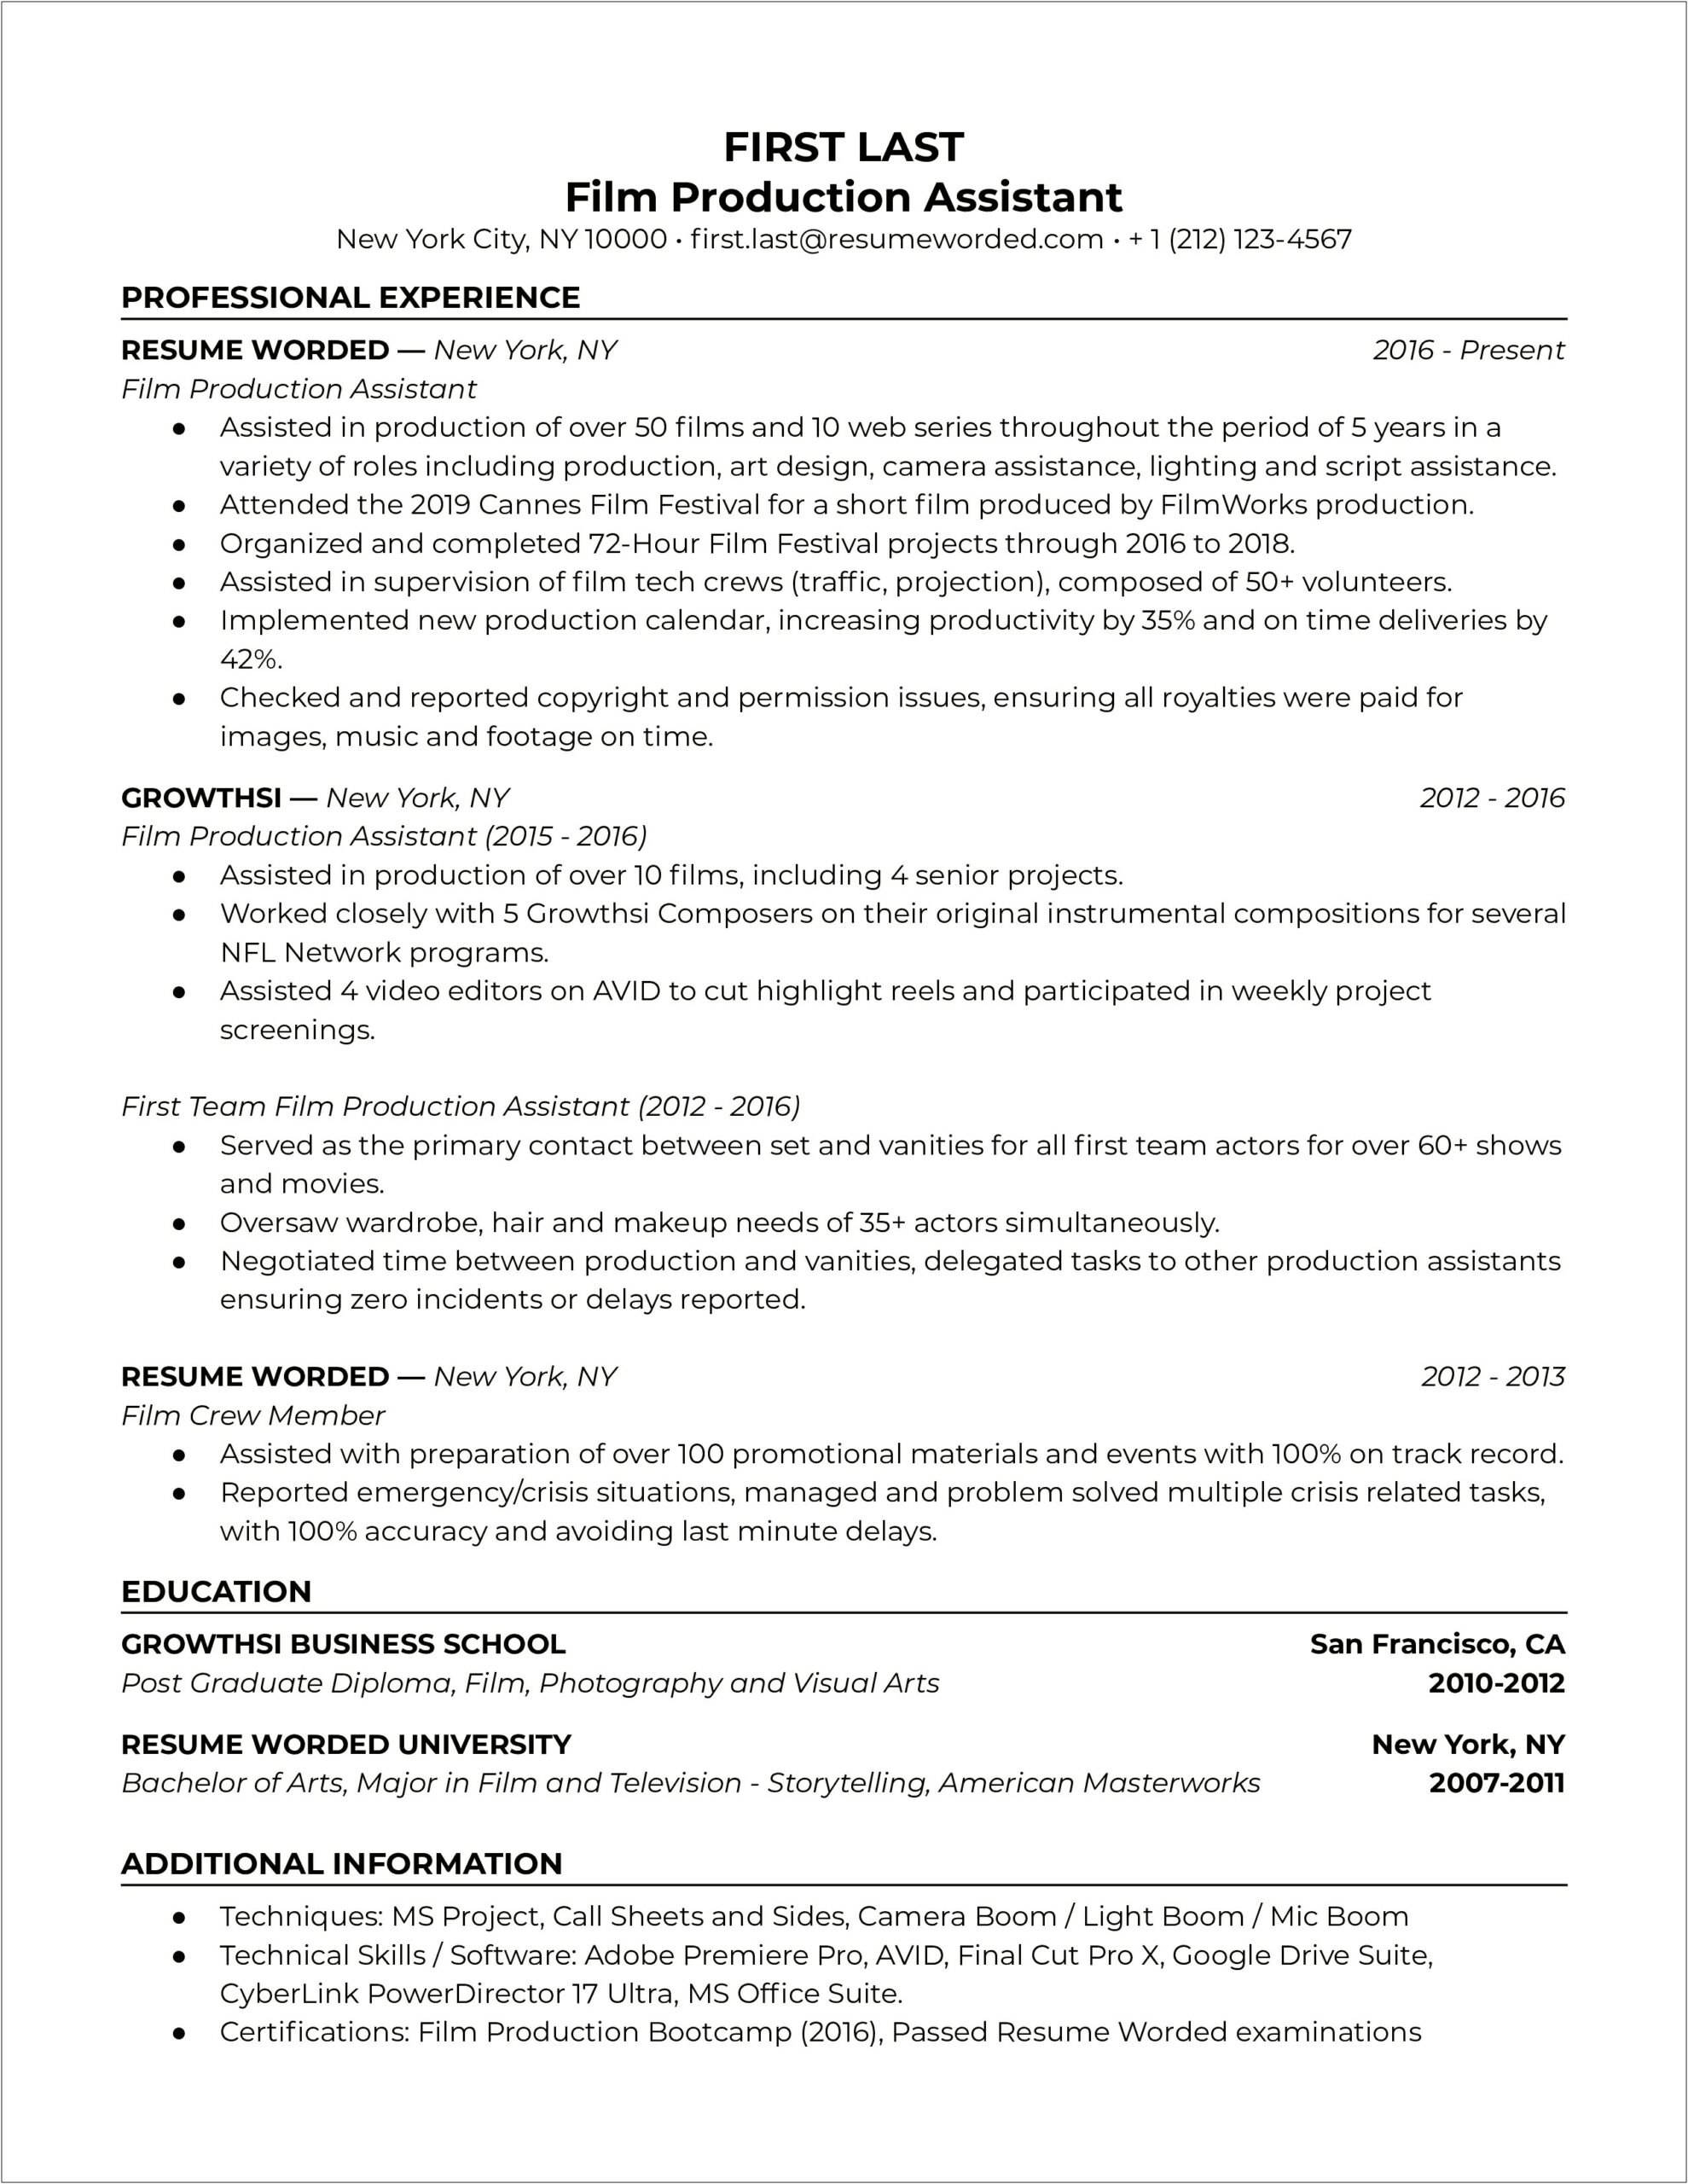 Resume Objectives For Film Industry